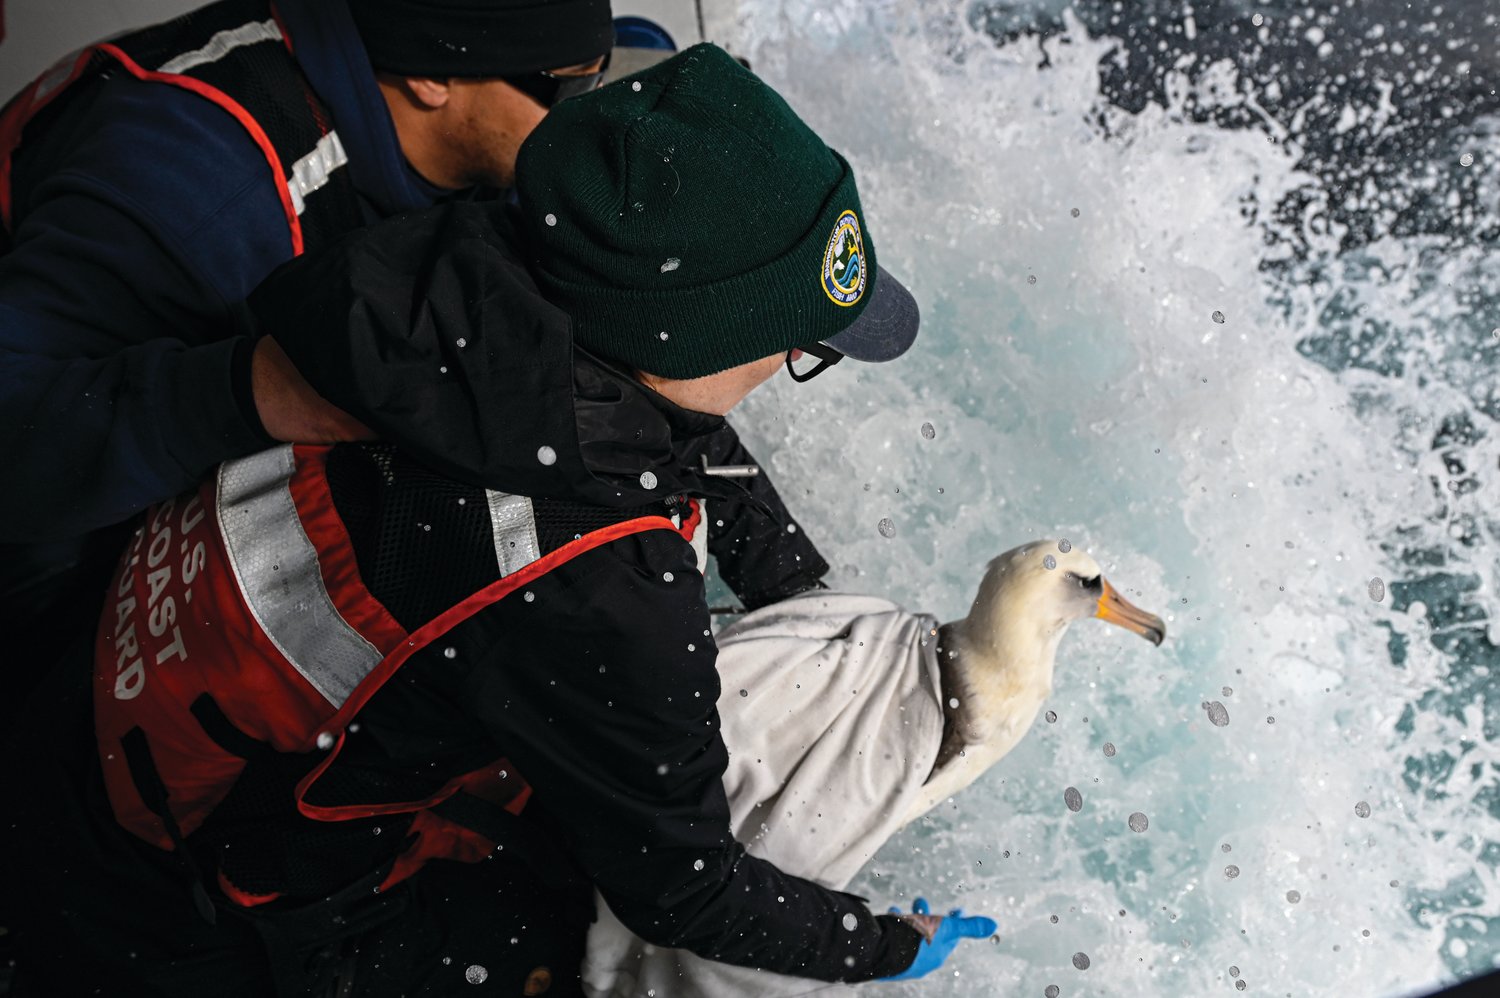 Jen Mannas of the Washington Department of Fish and Wildlife releases the rehabilitated Laysan albatross back to the sea.